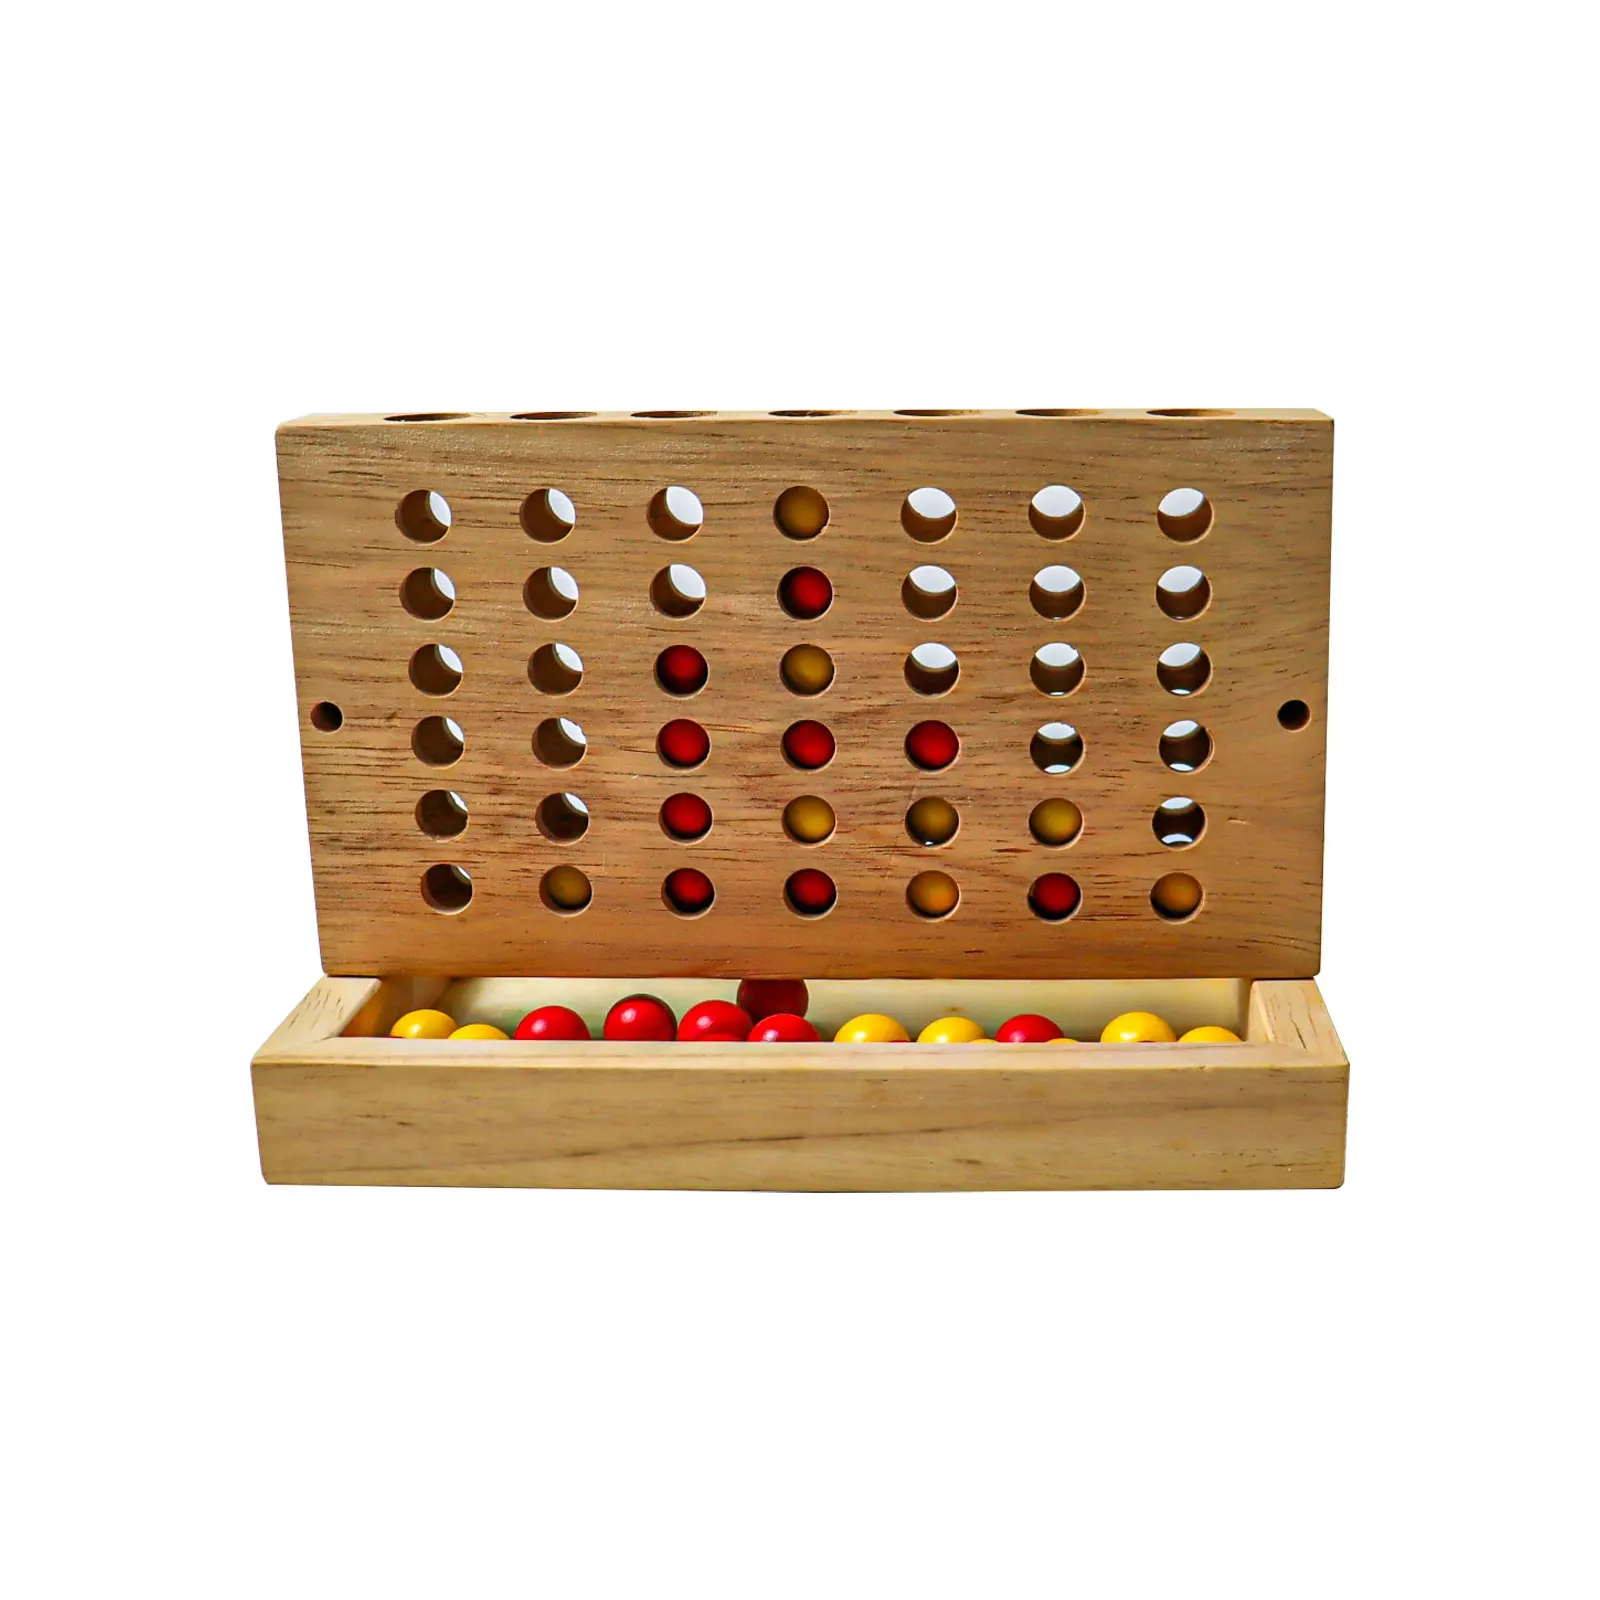 C04110 Wood Classic Family Fun Toys Line Up 4 toys games kids connect four Connect 4 Strategy Board Game Wooden 4 in a row game